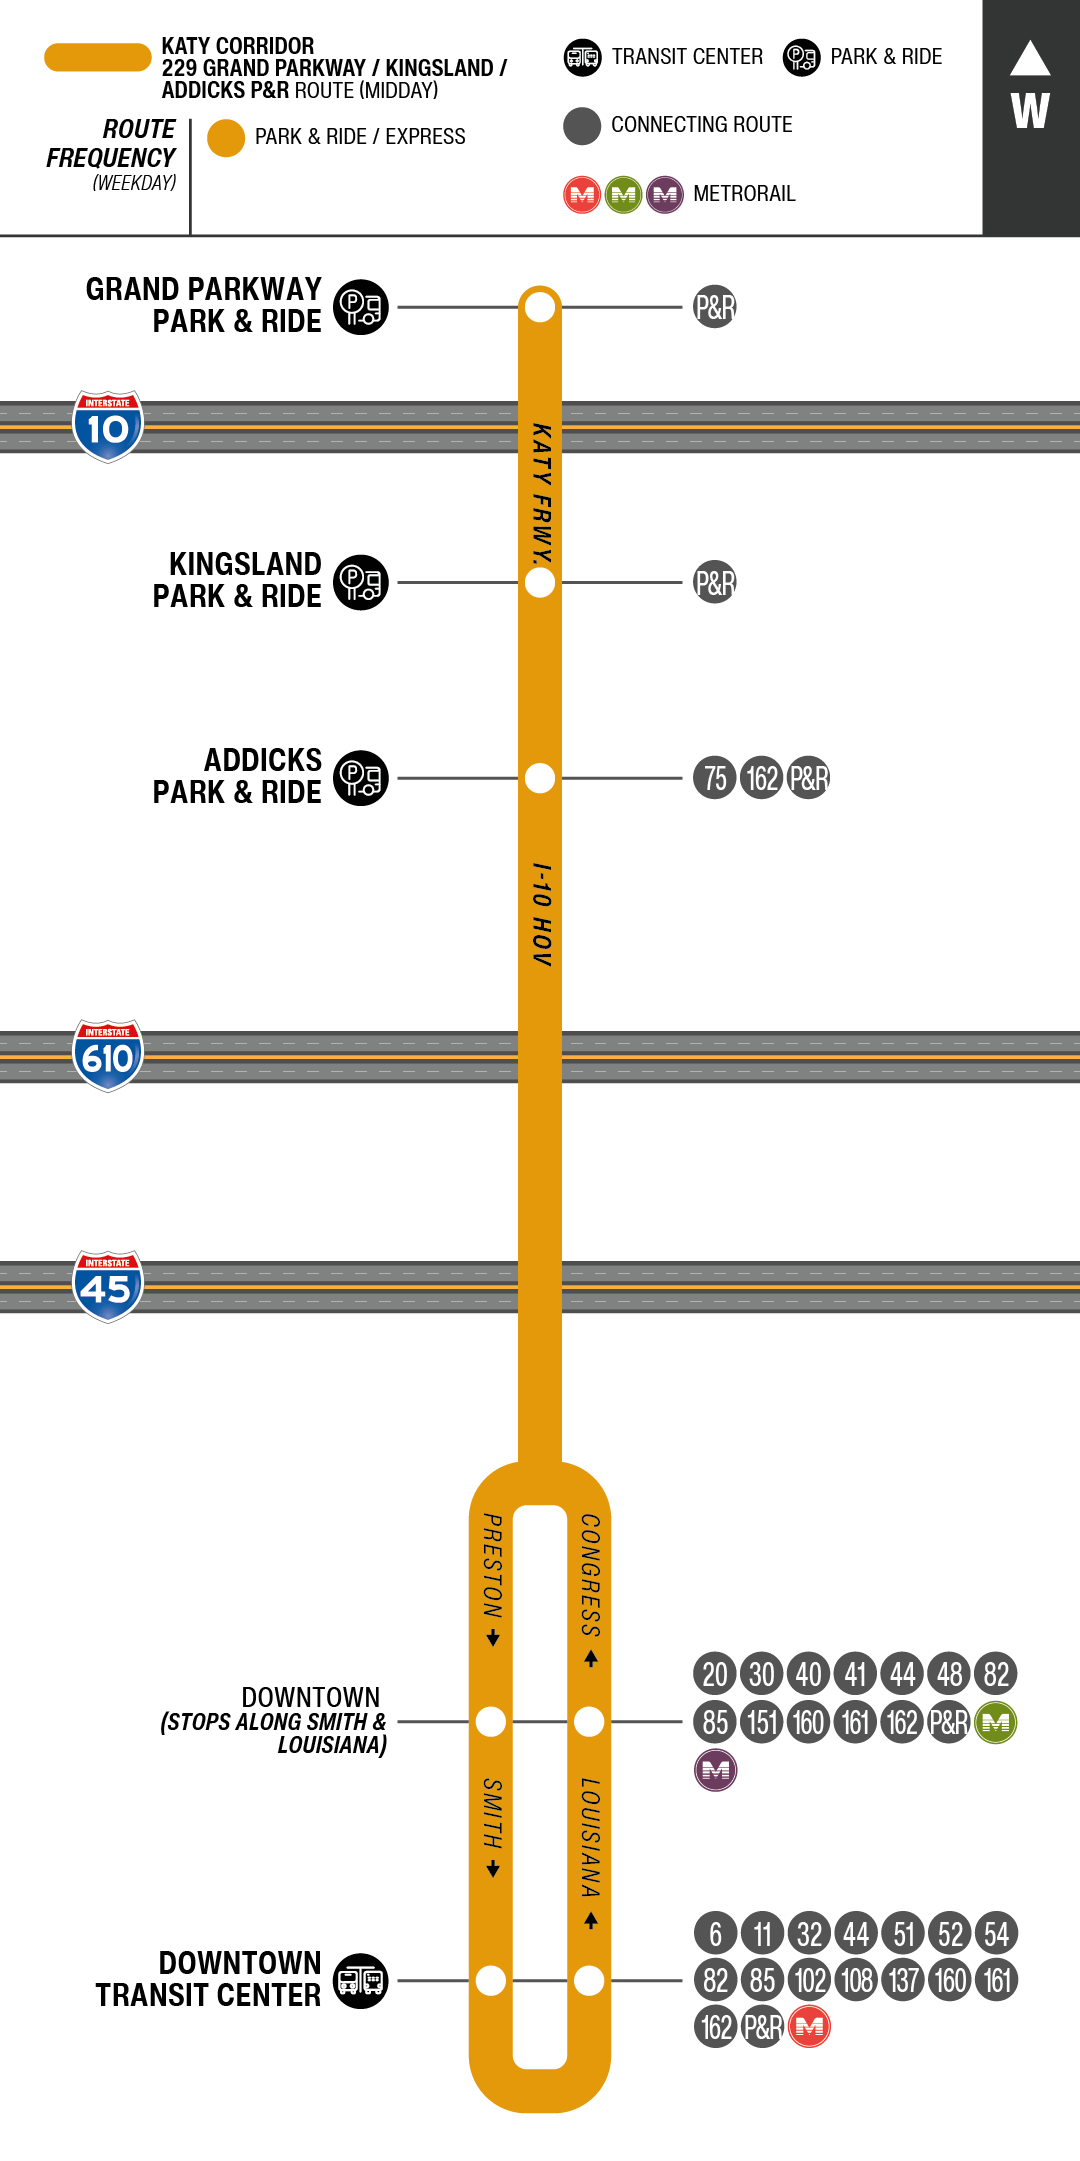 Route map for 229 Grand Parkway / Kingsland / Addicks Park & Ride bus